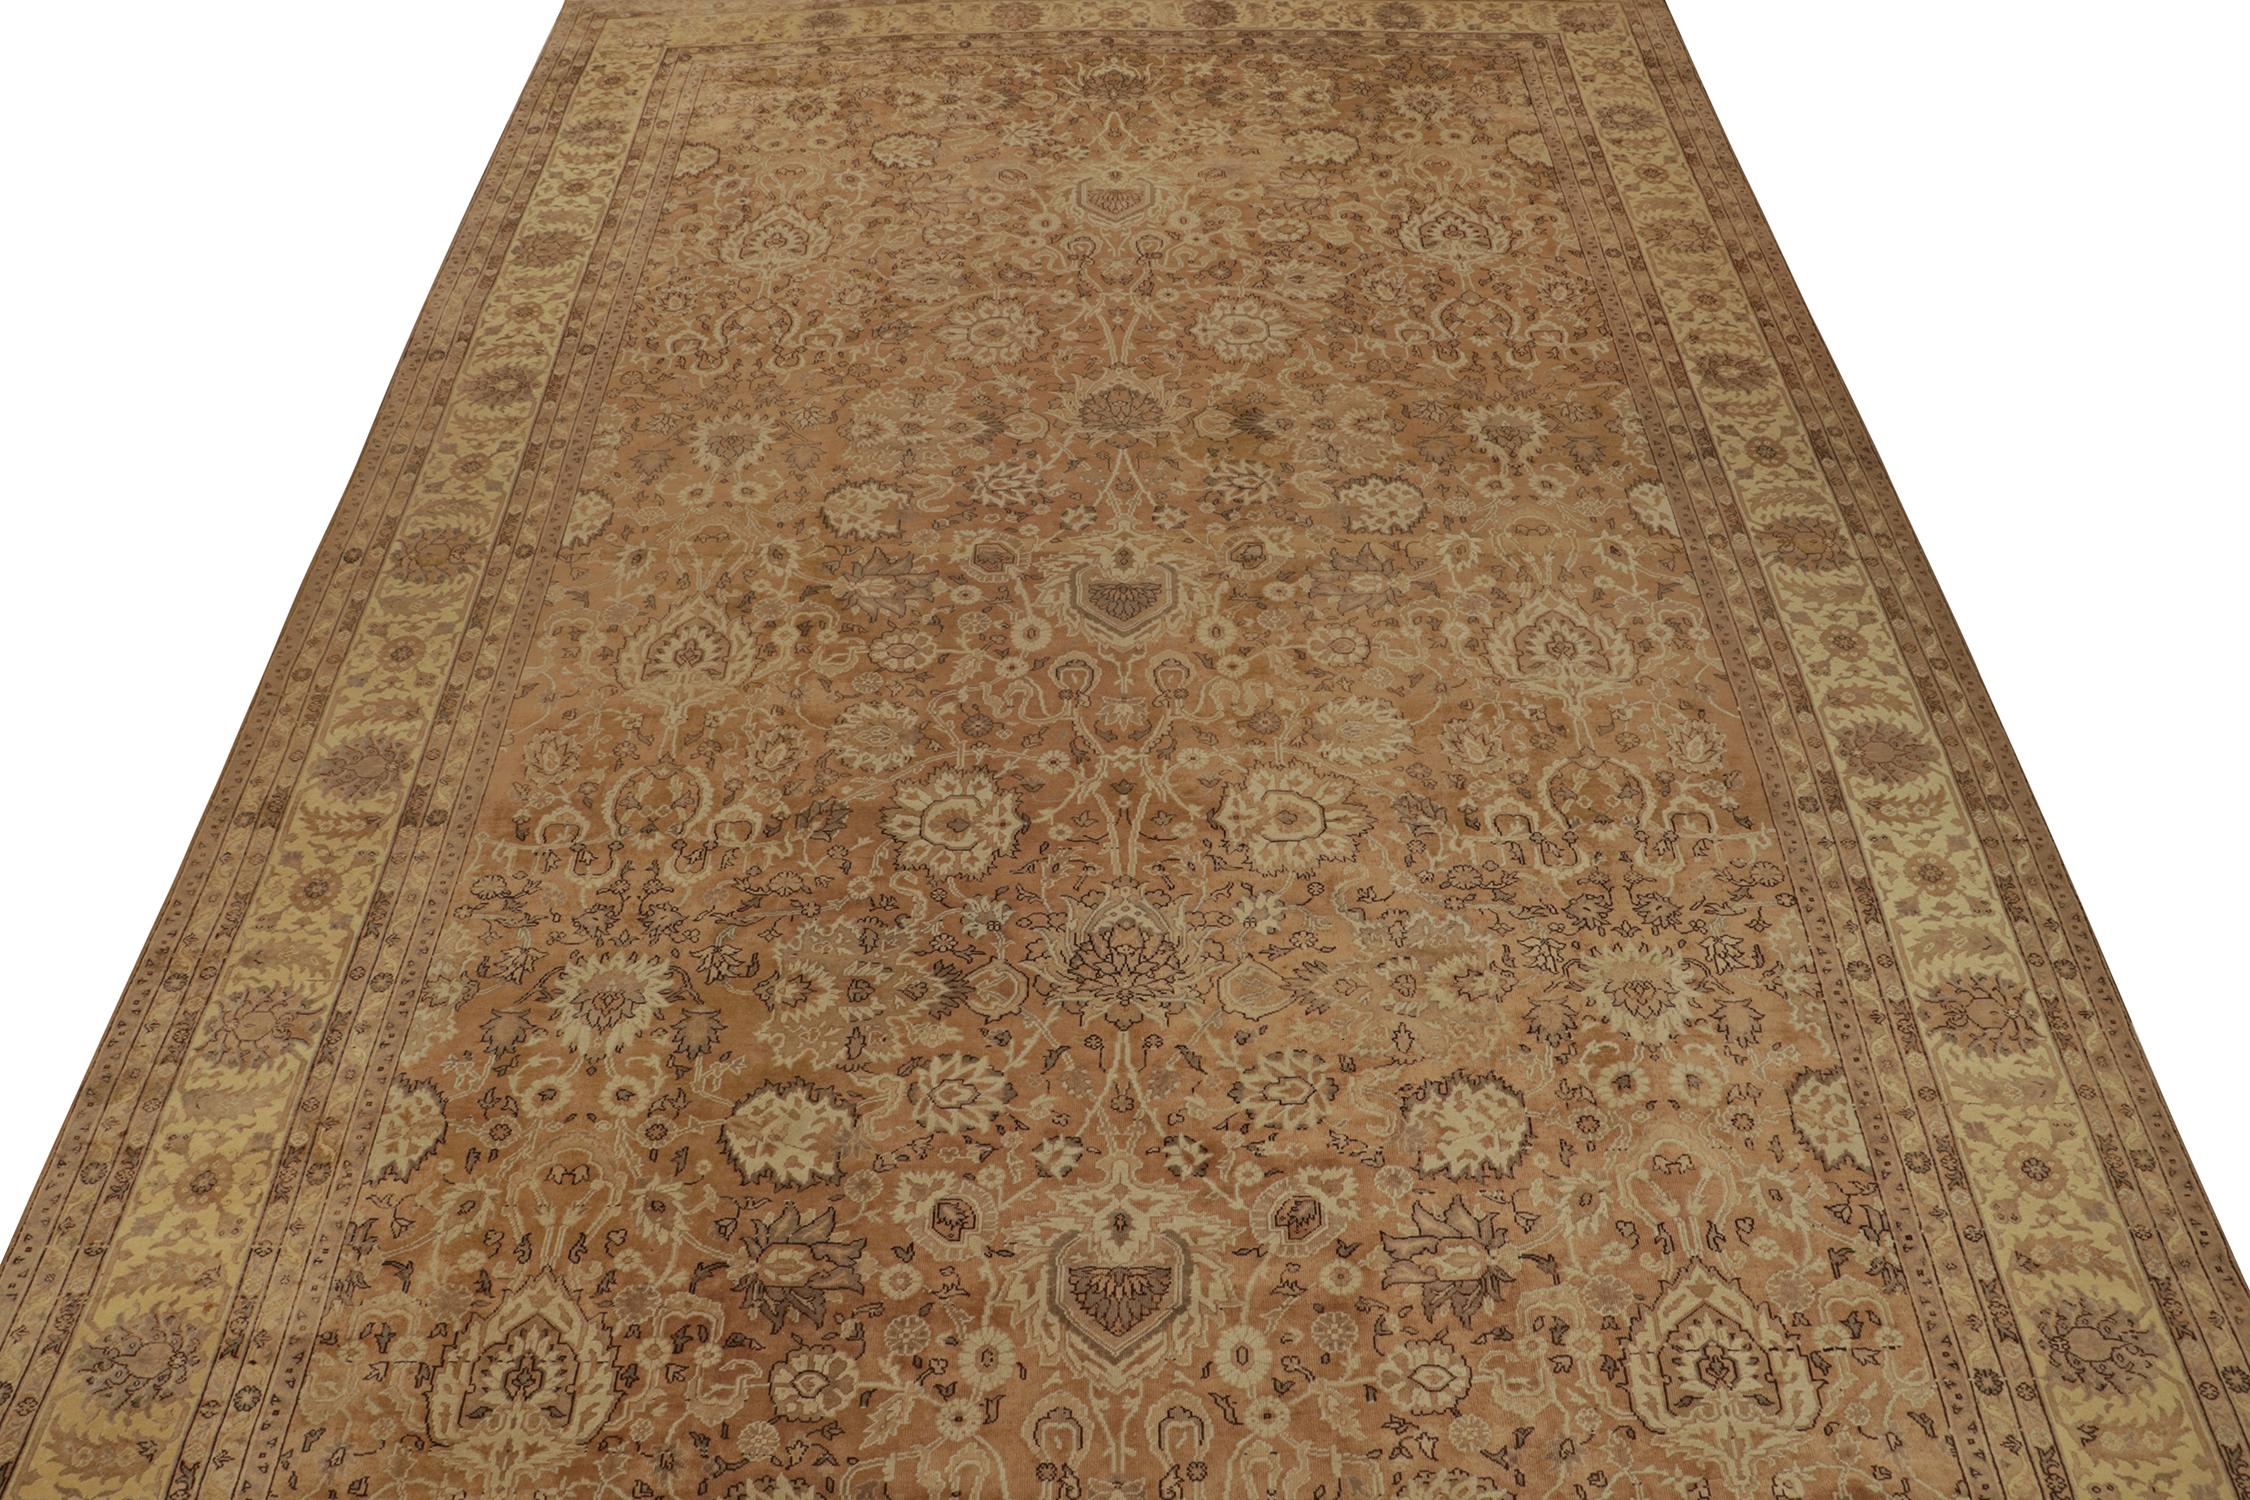 Rug & Kilim presents a rare antique 13x25 Persian rug with their latest curation of iconic classics. Hand-knotted in wool circa 1920-1930.

On the Design:

This all over pattern exemplifies rich Persian grandeur in its elaborate beige-brown and